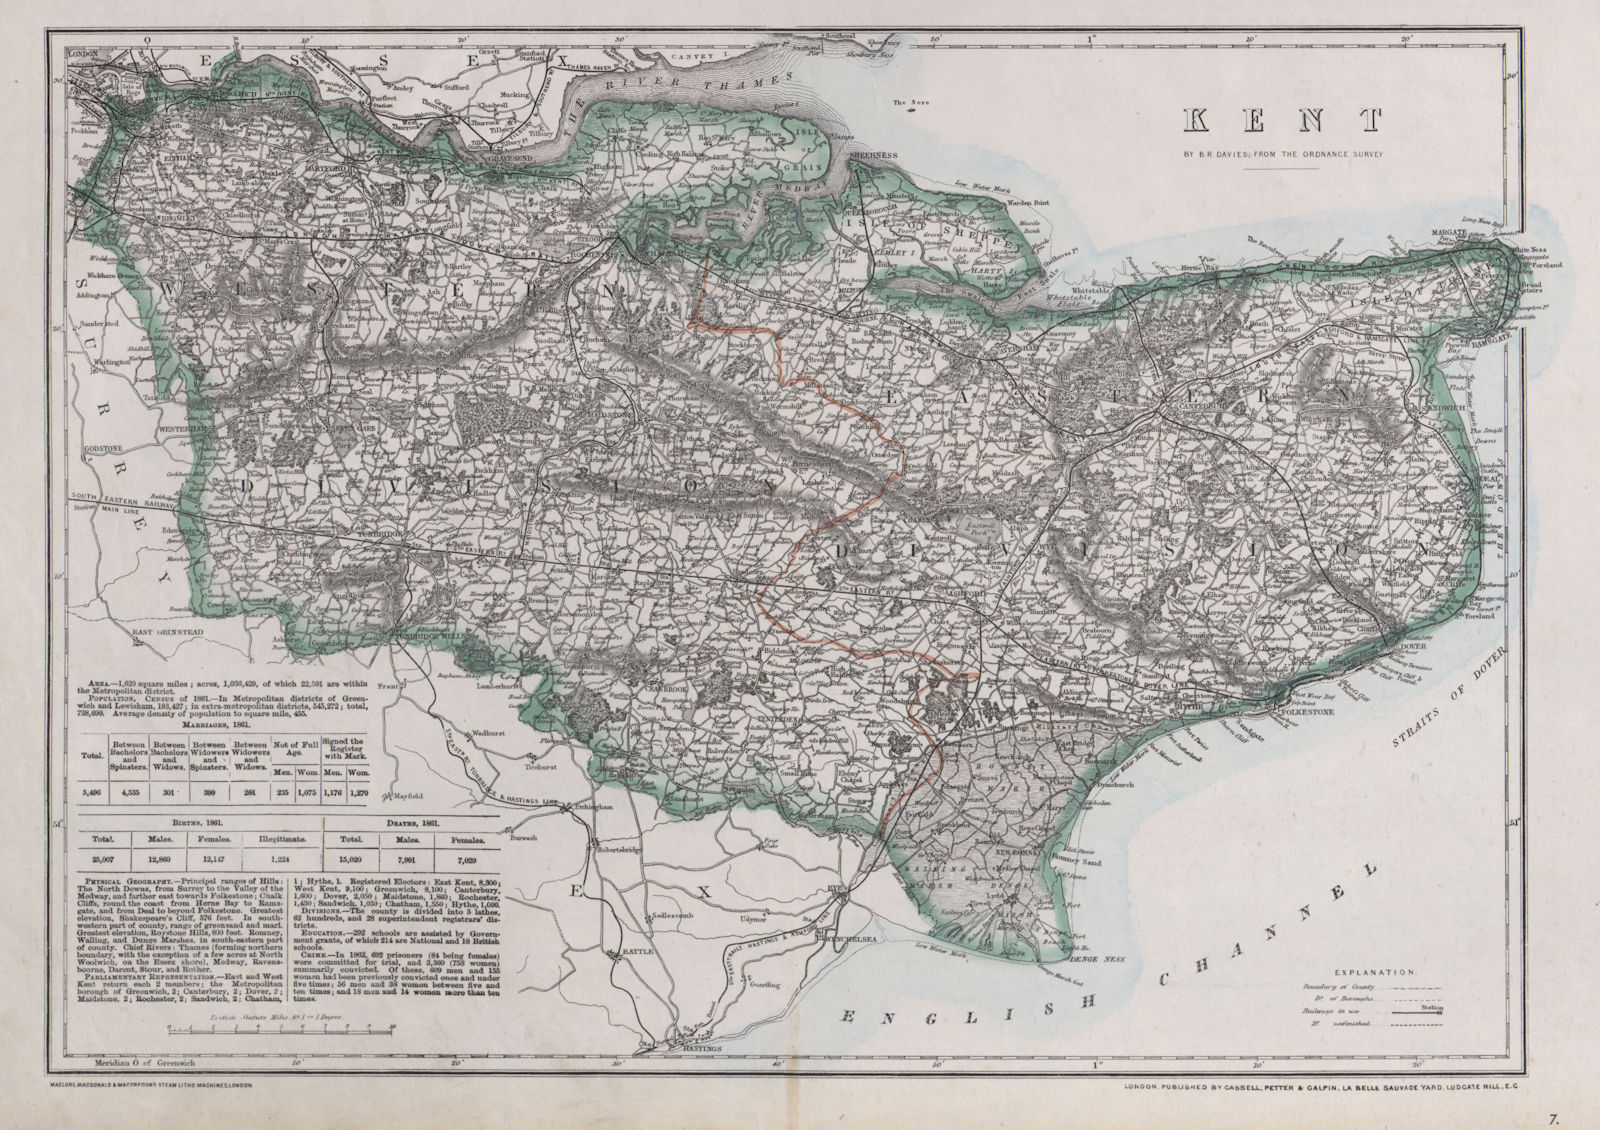 Associate Product KENT. County map. Downs. Railways in use/under construction. BR DAVIES 1868